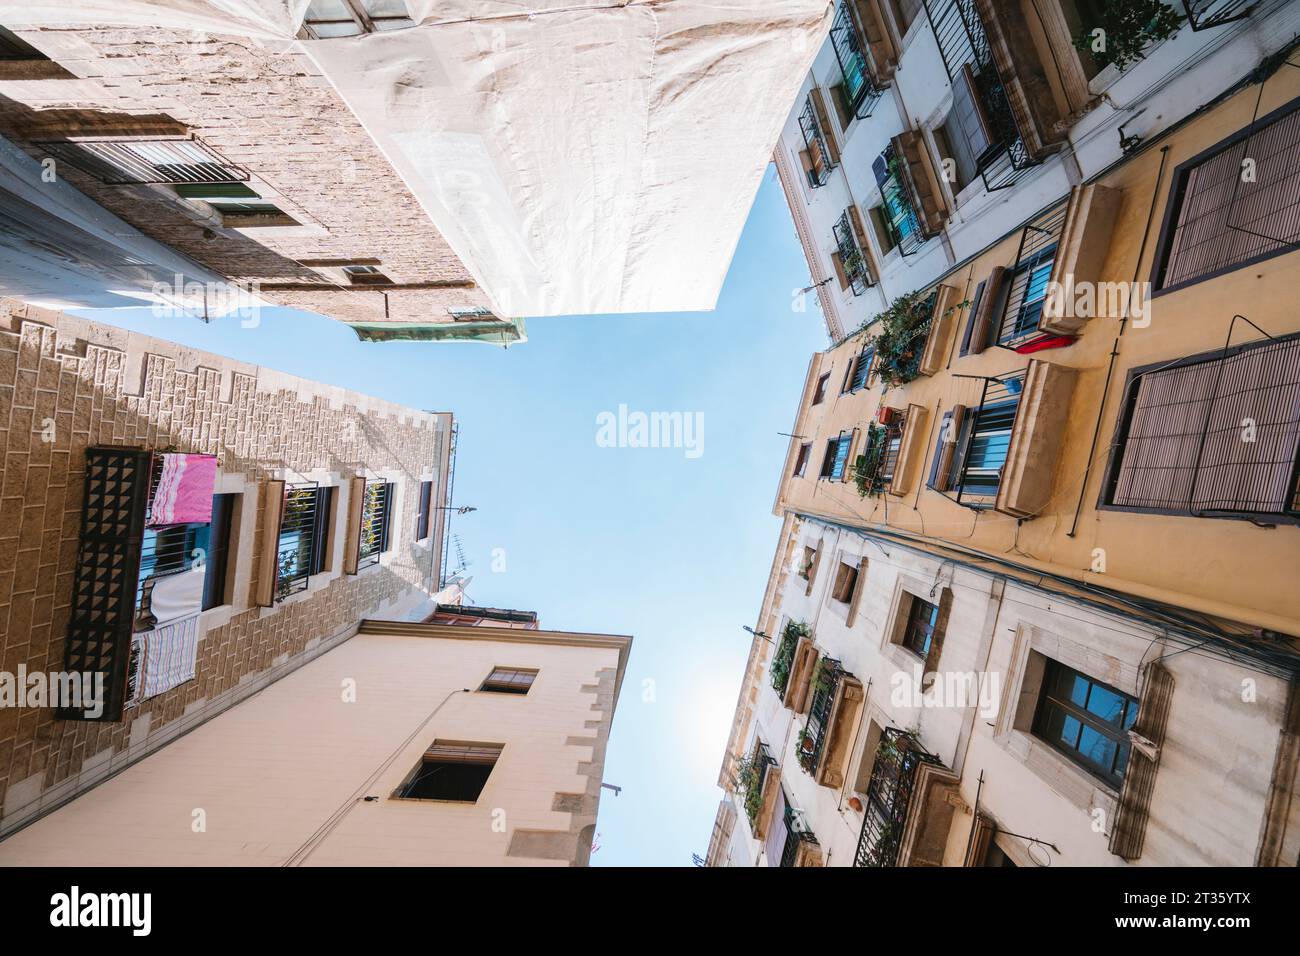 Spain, Catalonia, Barcelona, Directly below view of residential buildings in Gothic Quarter Stock Photo